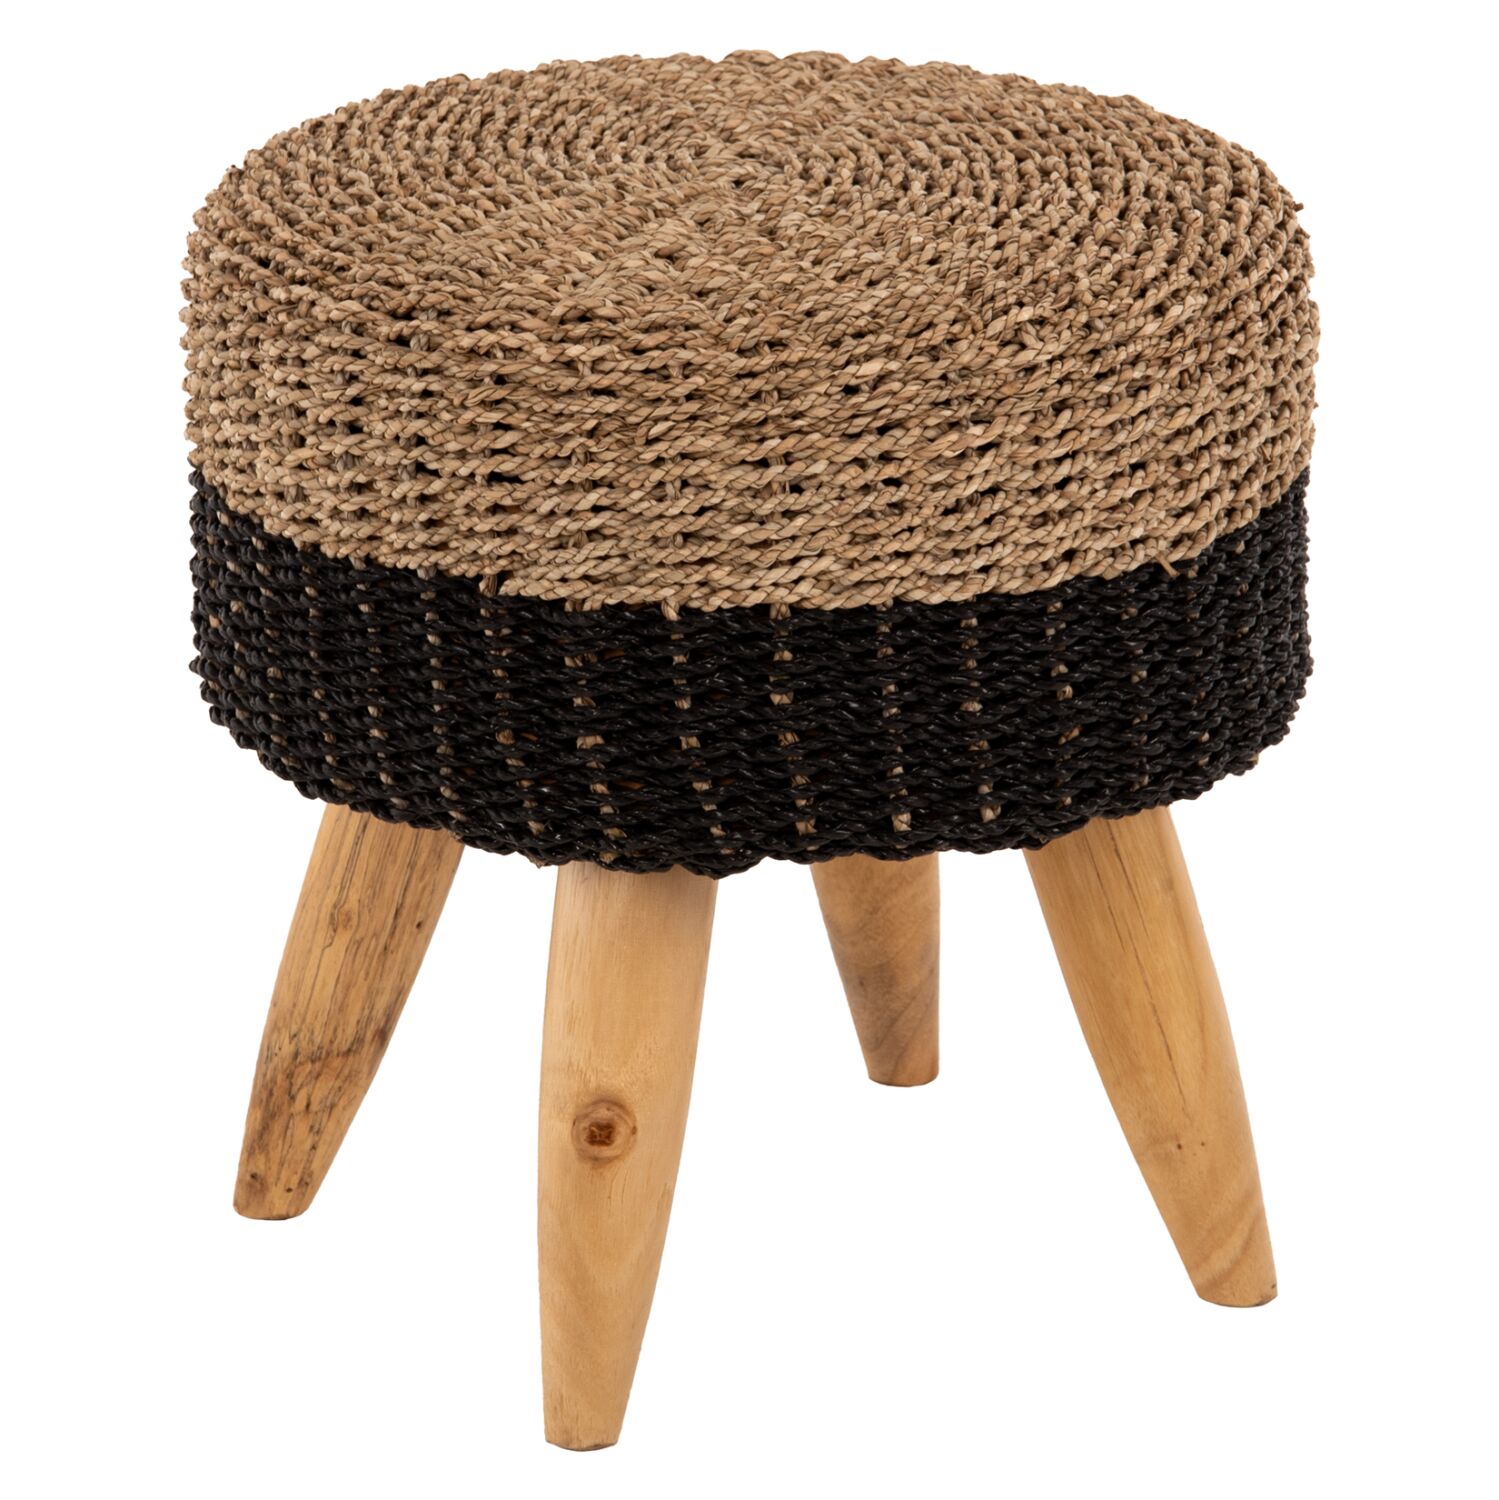 STOOL BEAM HM7826 TEAK WOOD AND SEAGRASS RUSH IN NATURAL & BLACK Φ43x45Hcm.